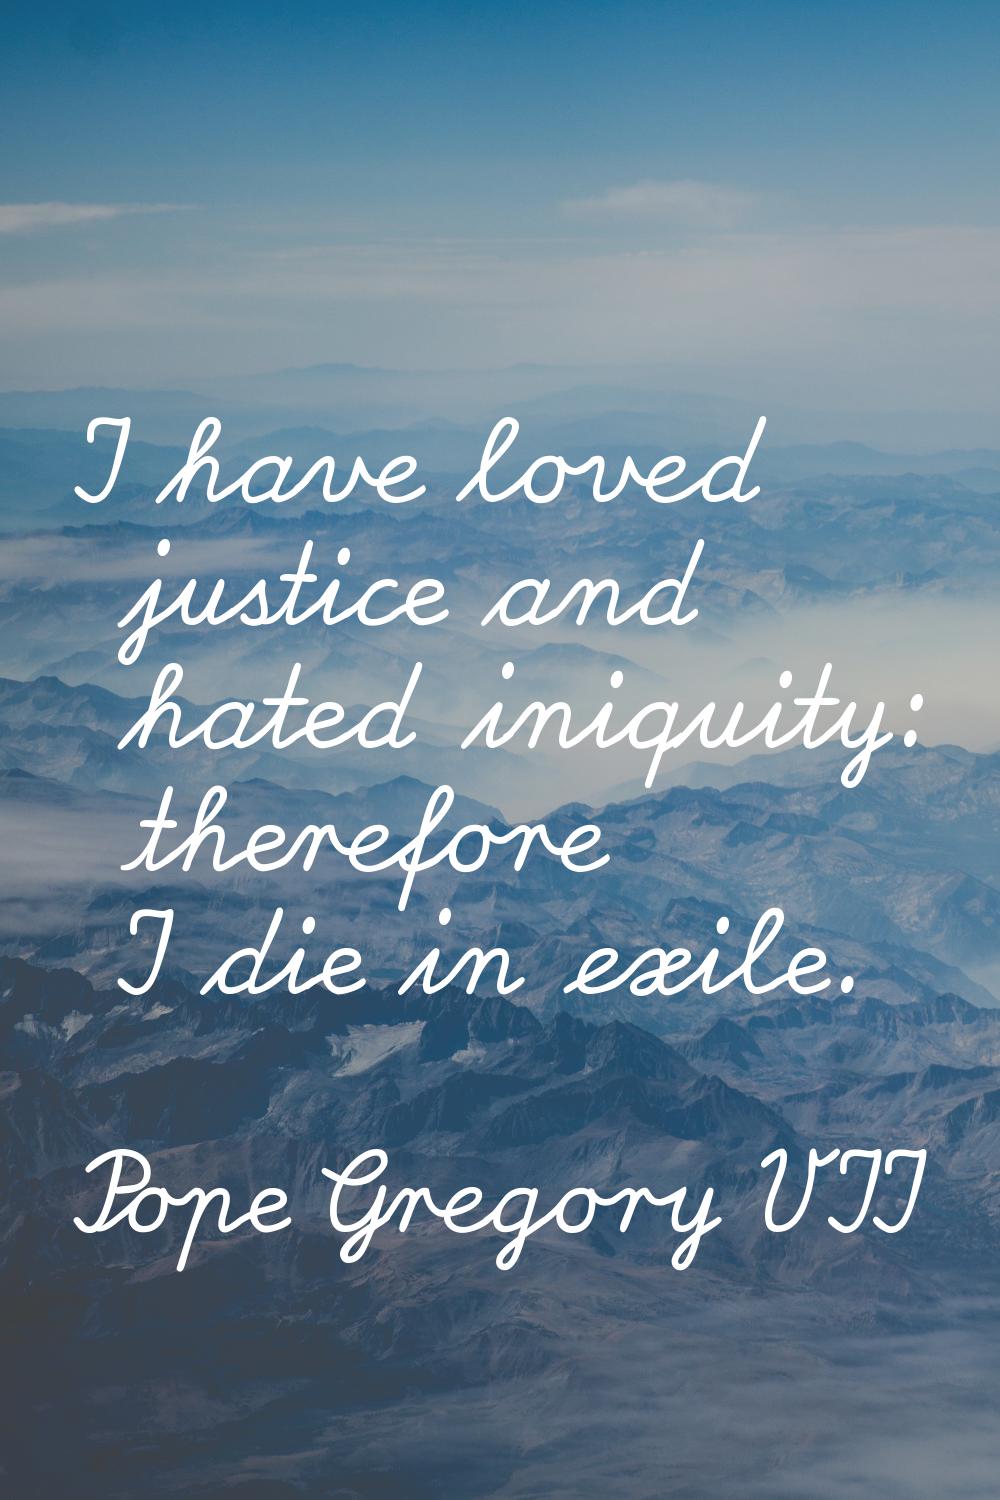 I have loved justice and hated iniquity: therefore I die in exile.